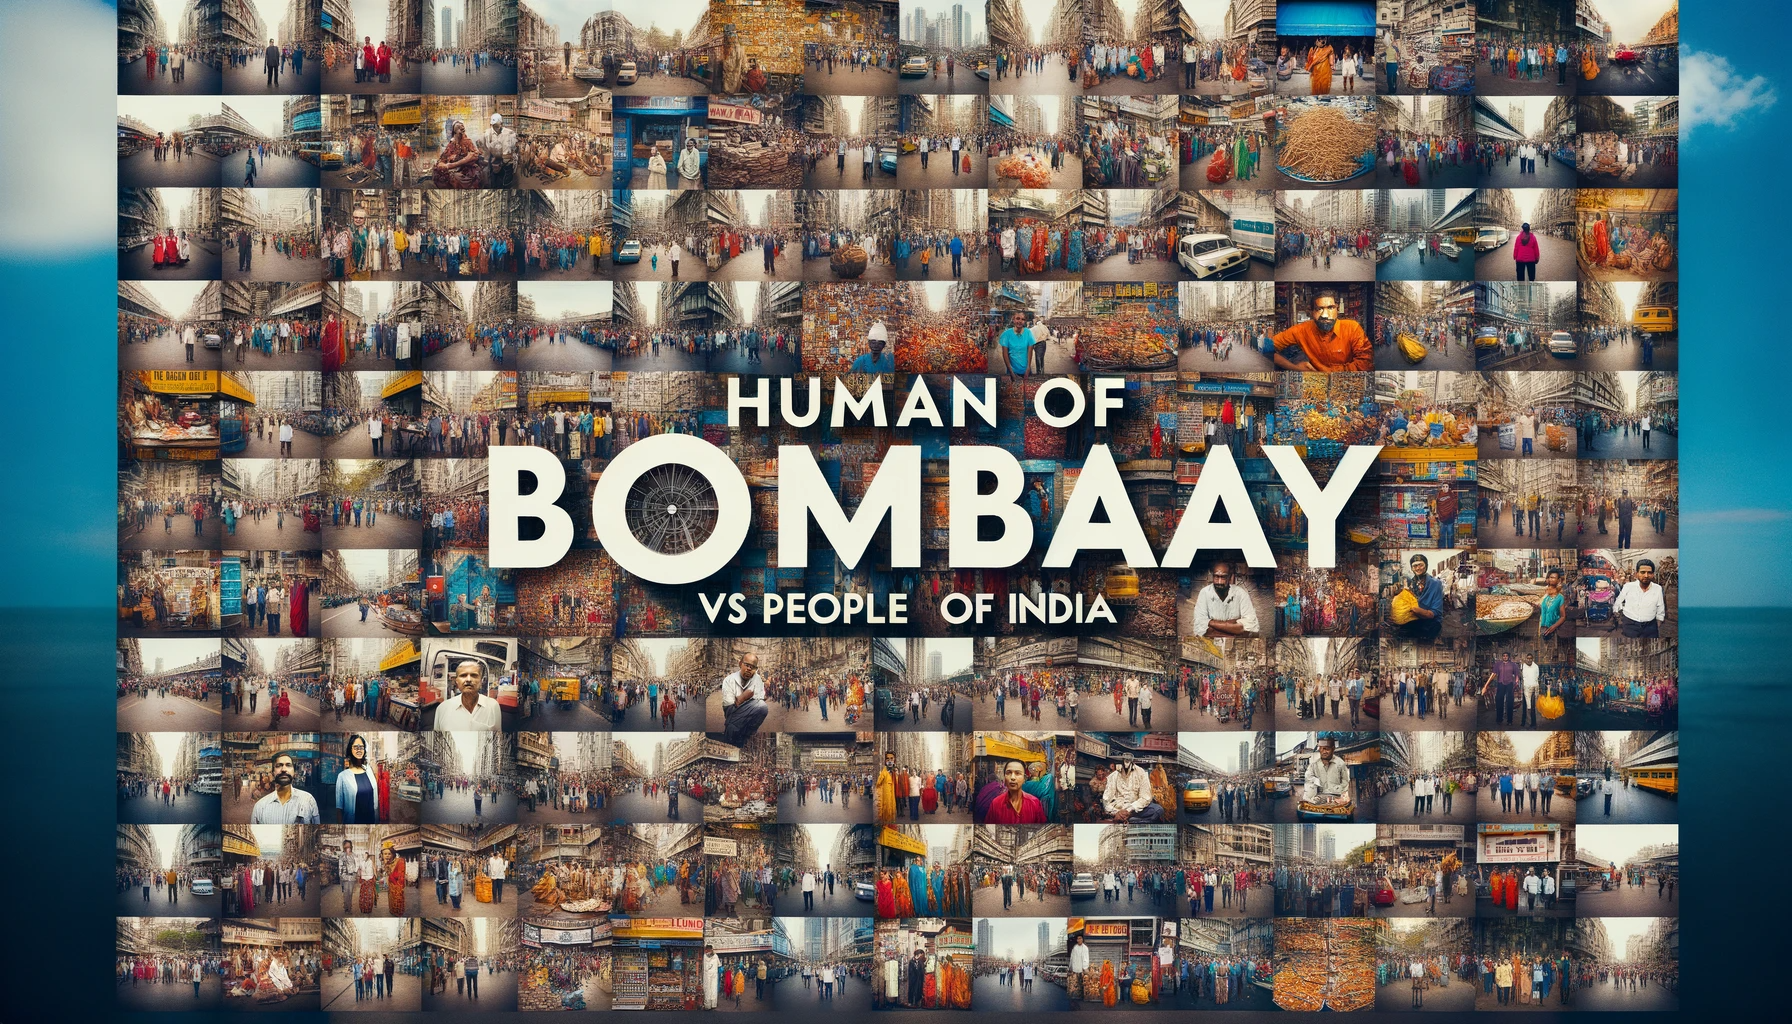 “Humans of Bombay vs. People of India: A Landmark Copyright Verdict by Delhi High Court”